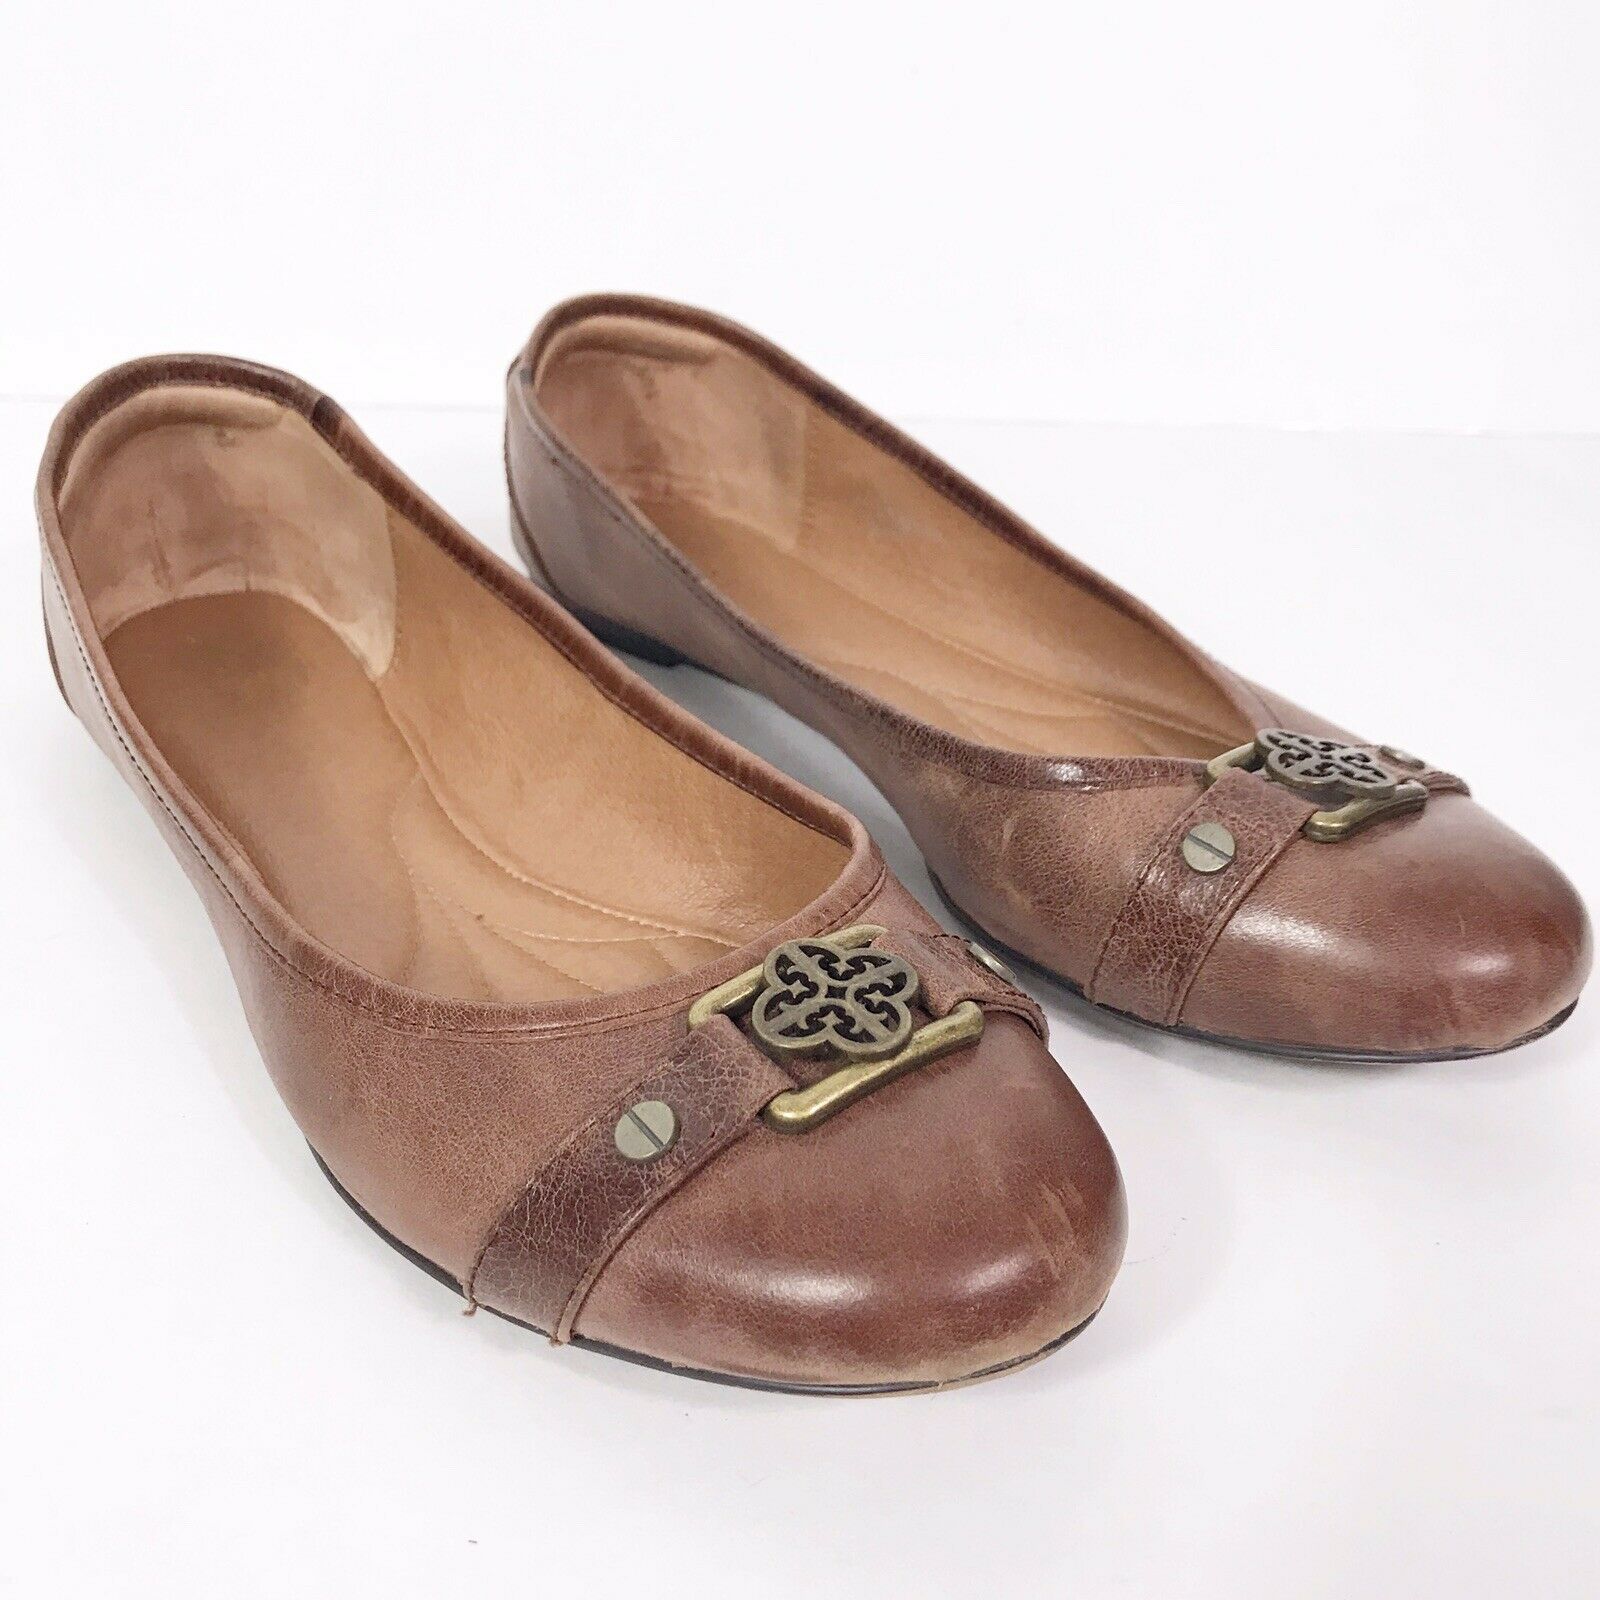 Isola Brown Leather Ballet Flats Slip On Shoes Comfort Walking Dressy Size 9.5